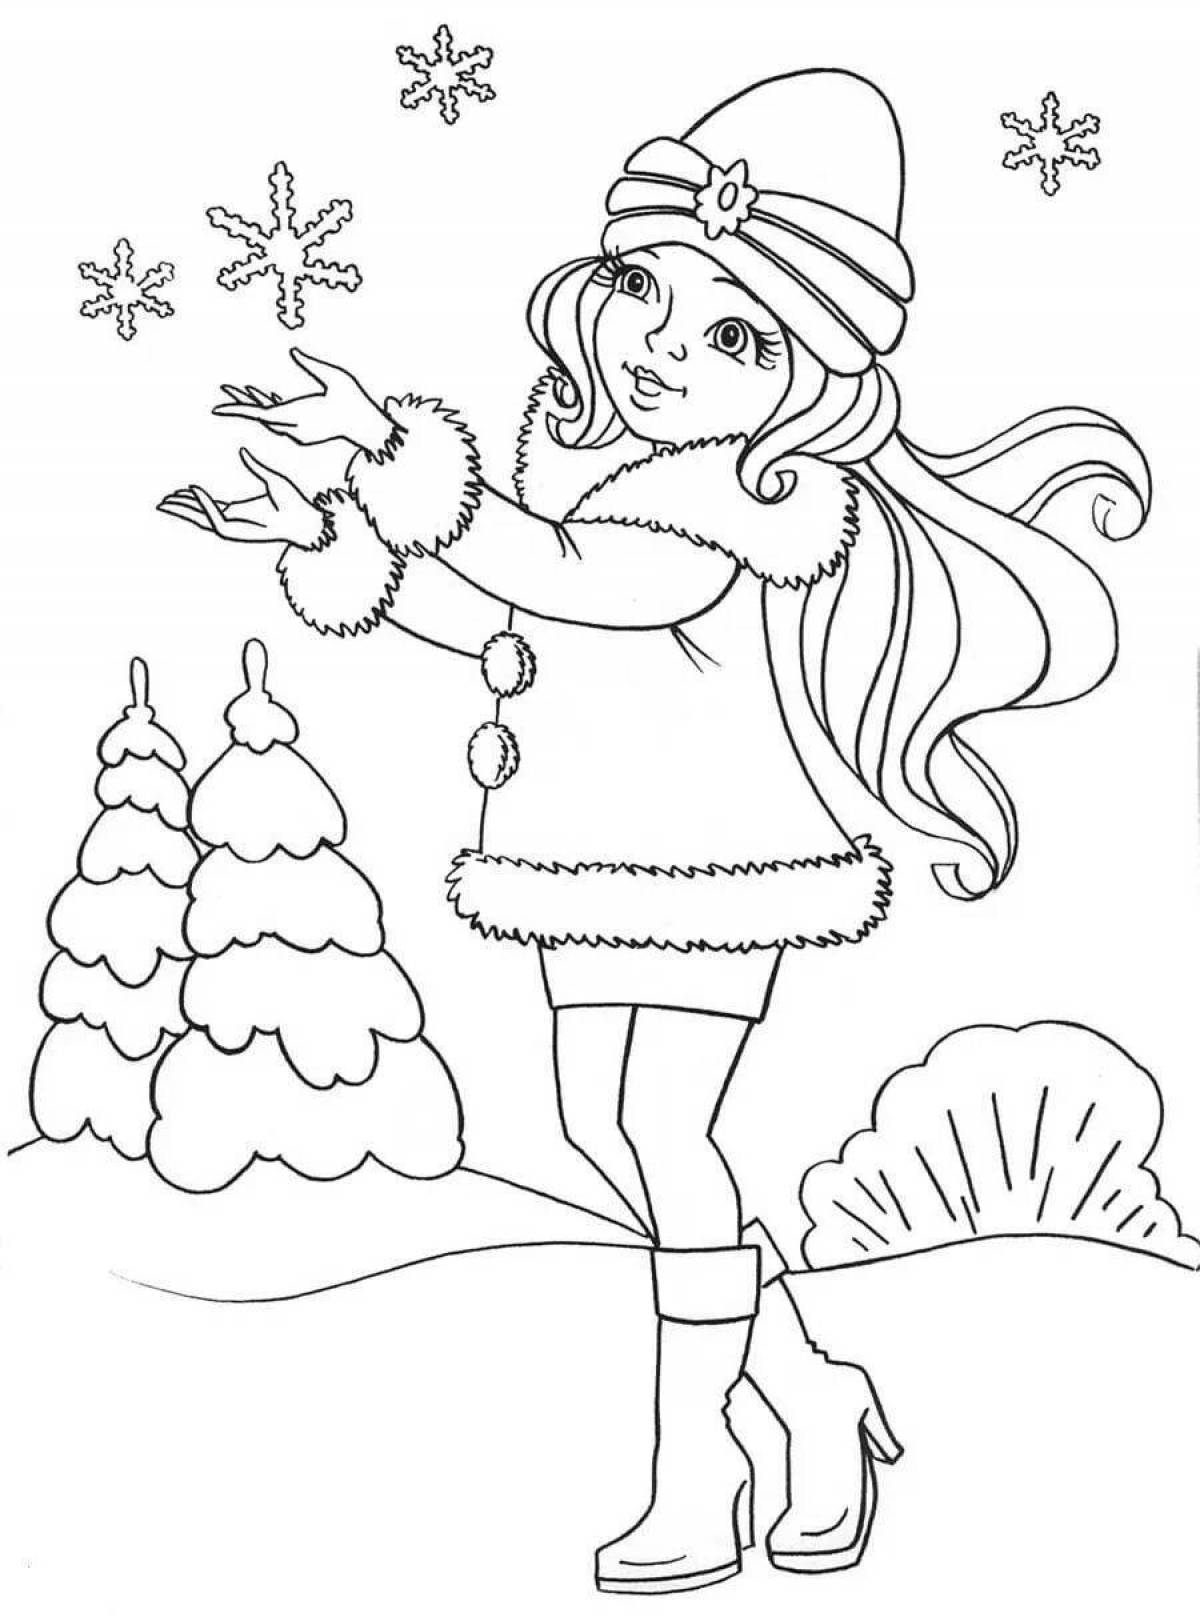 Glorious Christmas coloring book for girls 6 years old